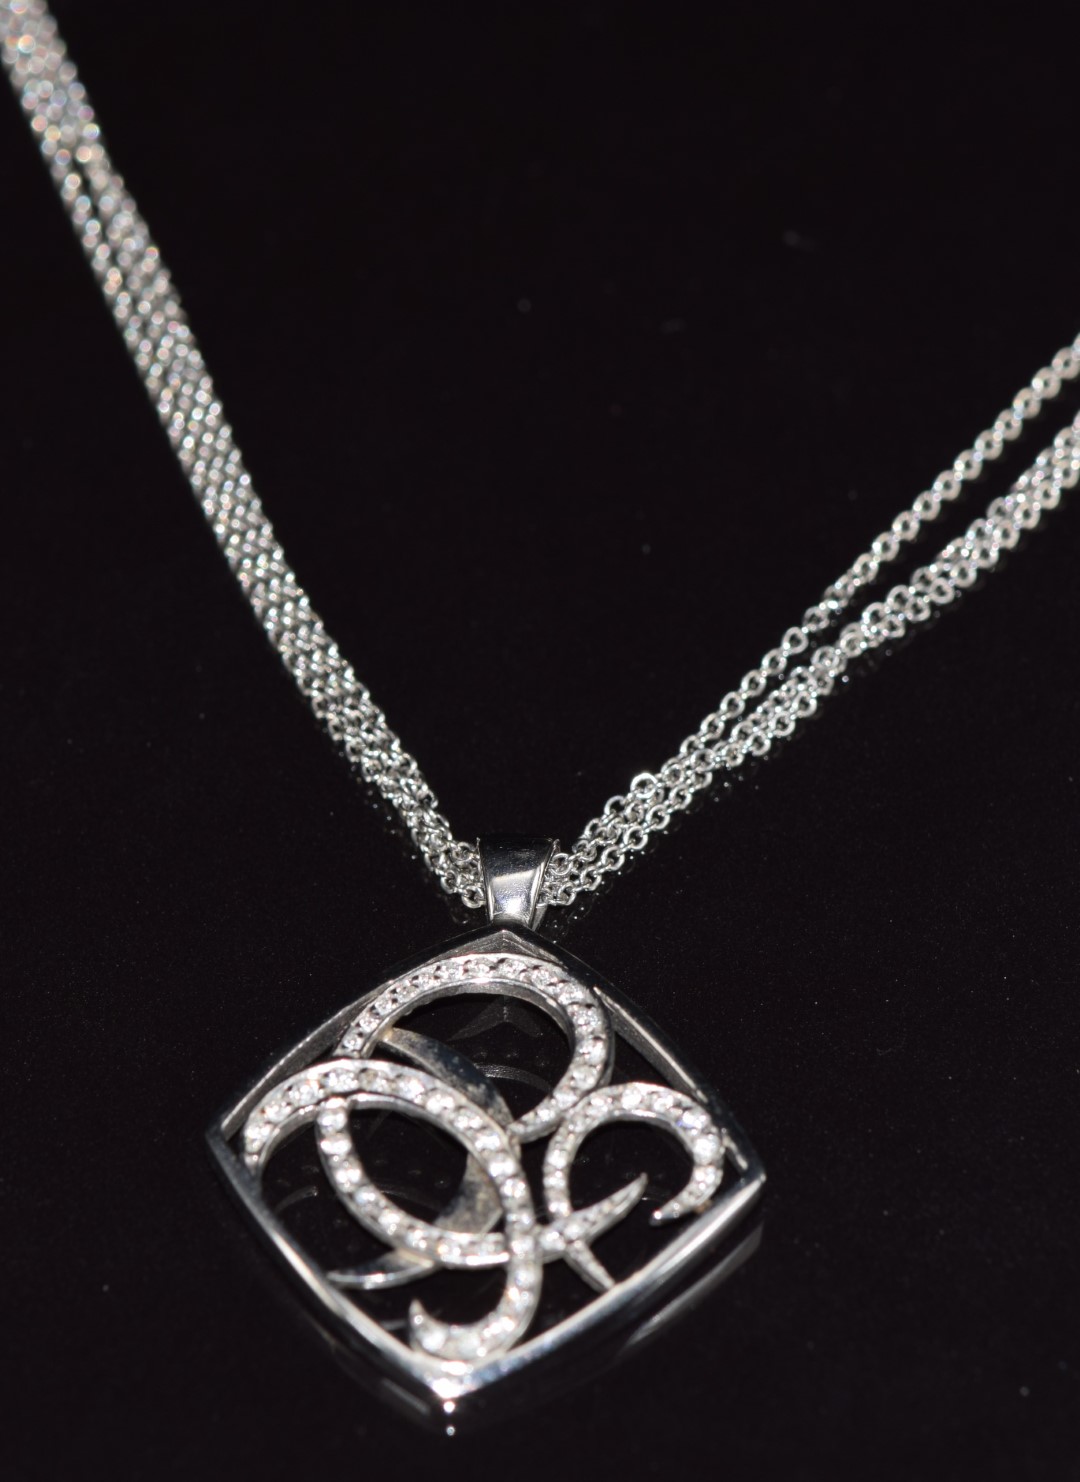 An 18ct gold designer pendant set with 54 diamonds, on triple strand necklace / chain, from the - Image 2 of 3